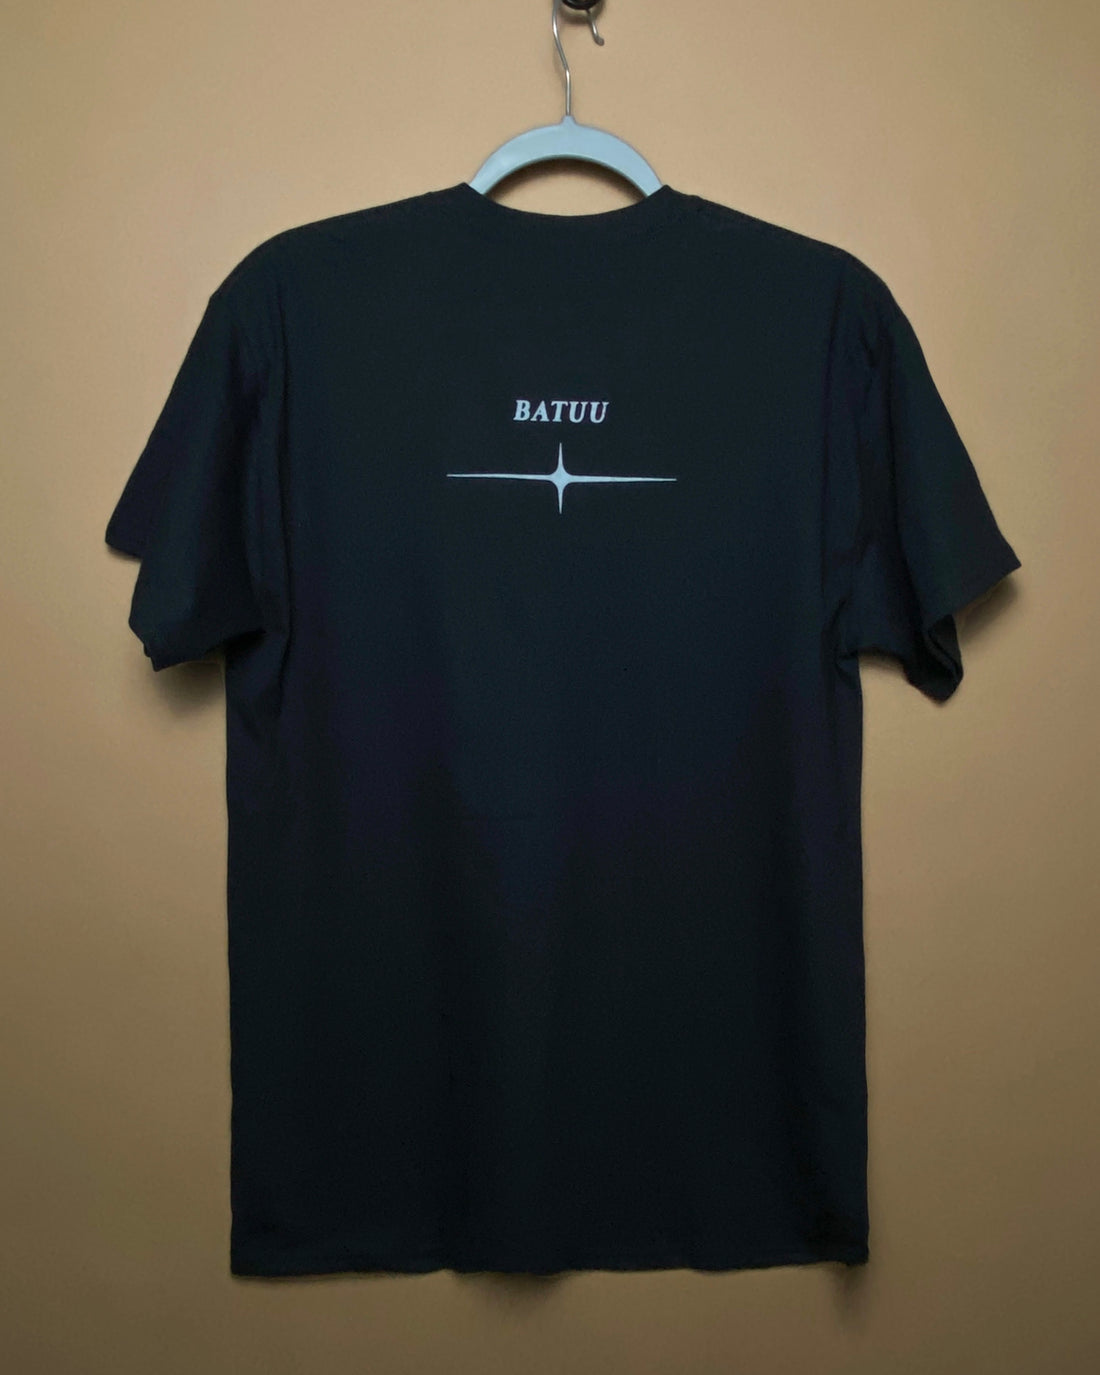 Batuu "A Beacon For Drifters" Black Tee (front and back)